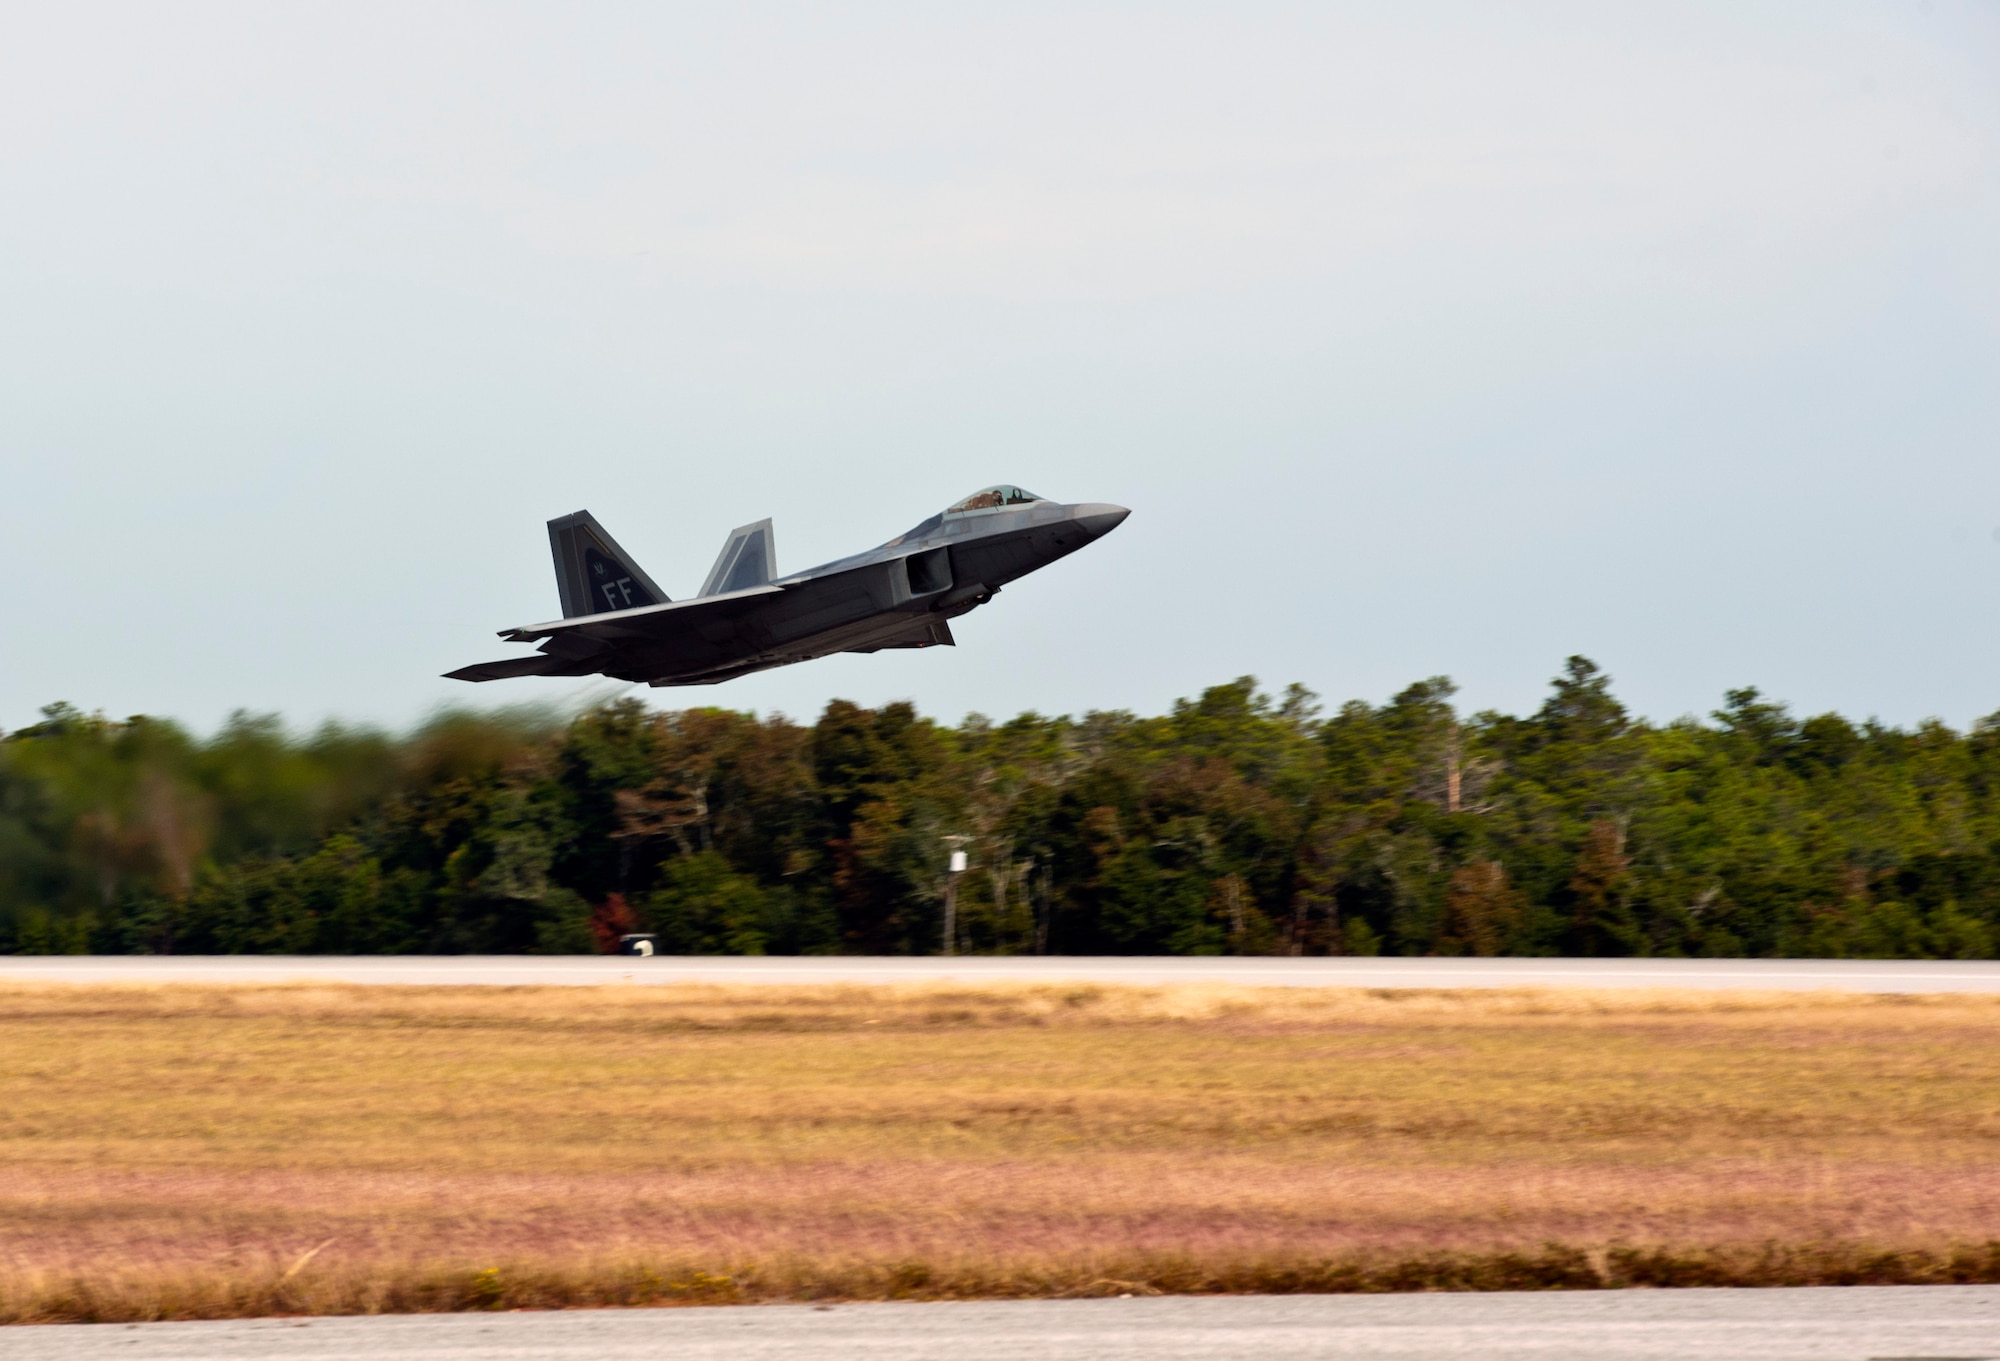 An F-22 Raptor takes off for an integrated training mission on Eglin Air Force Base, Florida, Nov. 5, 2014. The U.S. Air Force deployed four F-22A Raptors from Joint Base Langley-Eustis, Virginia, to Eglin Air Force Base, Florida, for the first operational integration training mission with the F-35A Lightning II assigned to the 33rd Fighter Wing. The purpose of the training was to improve integrated employment of fifth-generation assets and tactics. (U.S. Air Force photo/Staff Sgt. Marleah Robertson)